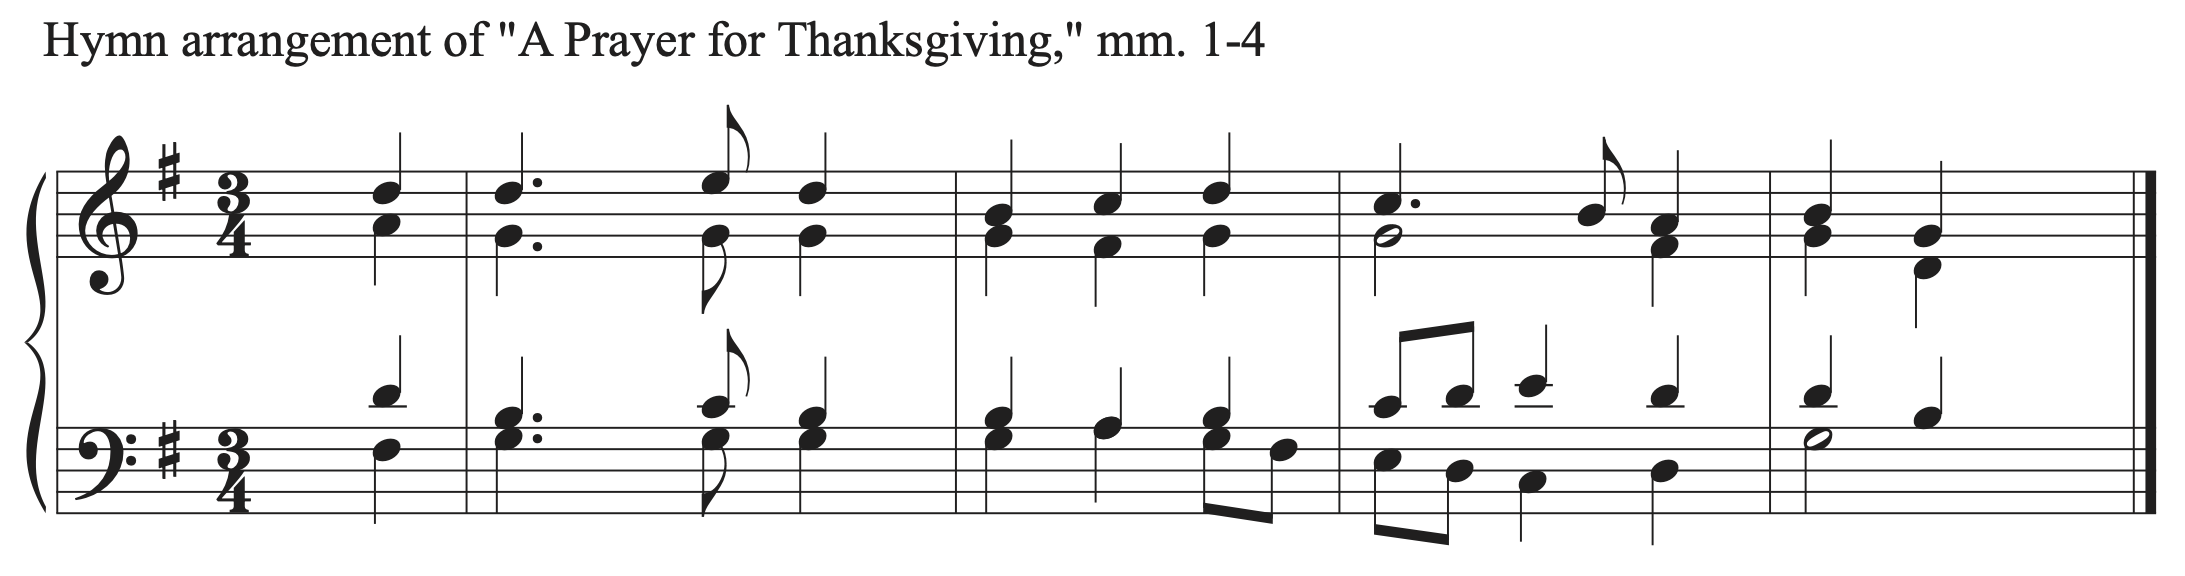 Hymn arrangement of "A Prayer for Thanksgiving," measures 1 to 4.